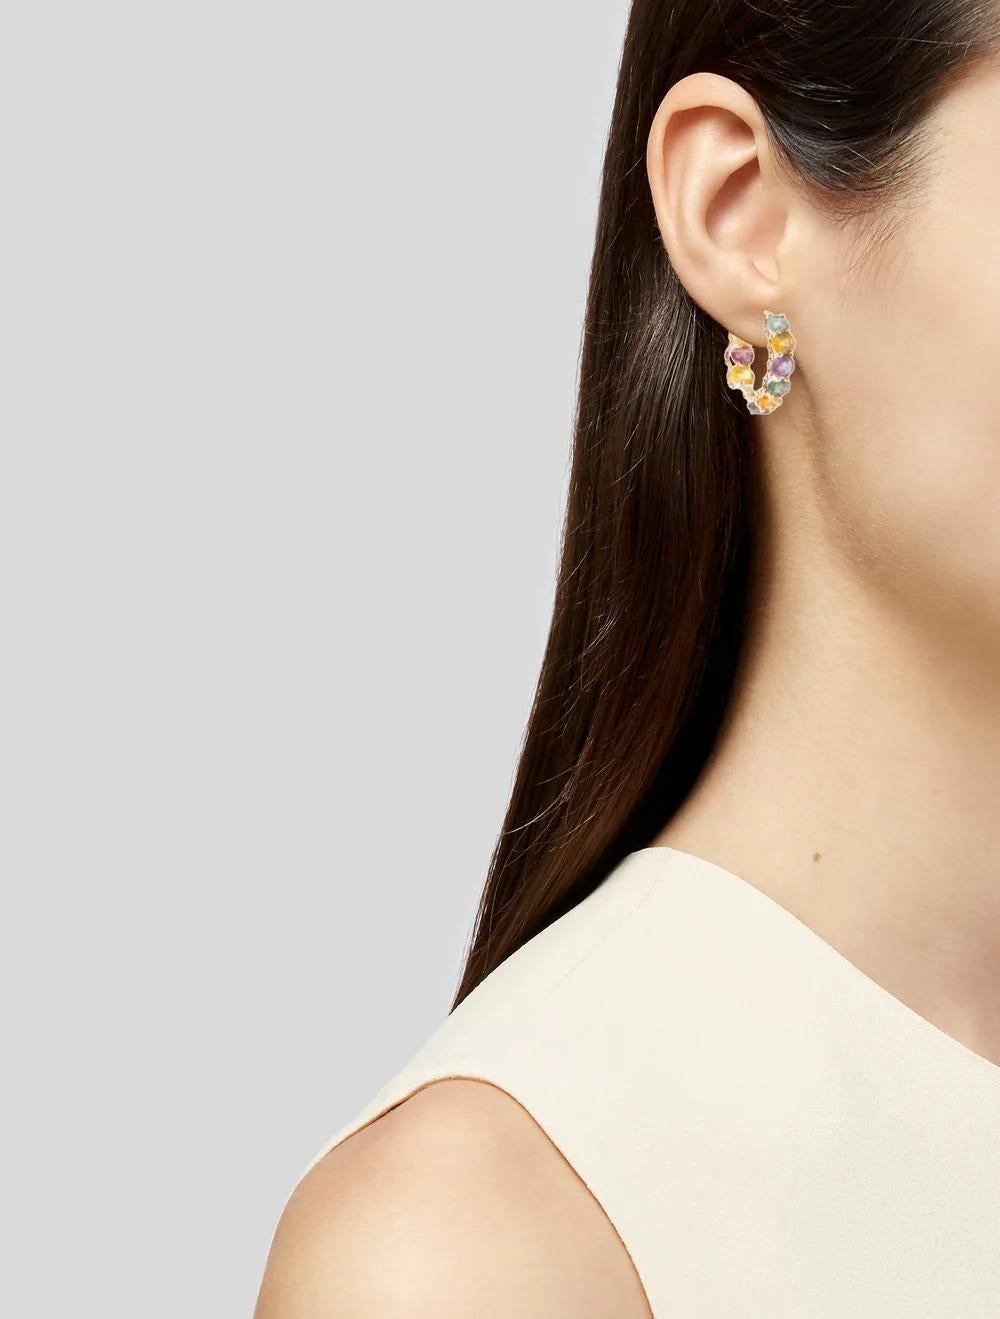 Elevate your style with these stunning 14K yellow gold hoop earrings, adorned with a mesmerizing 7.00 carat oval brilliant sapphire gemstone. Crafted to perfection, these earrings exude elegance and sophistication, making them a perfect addition to